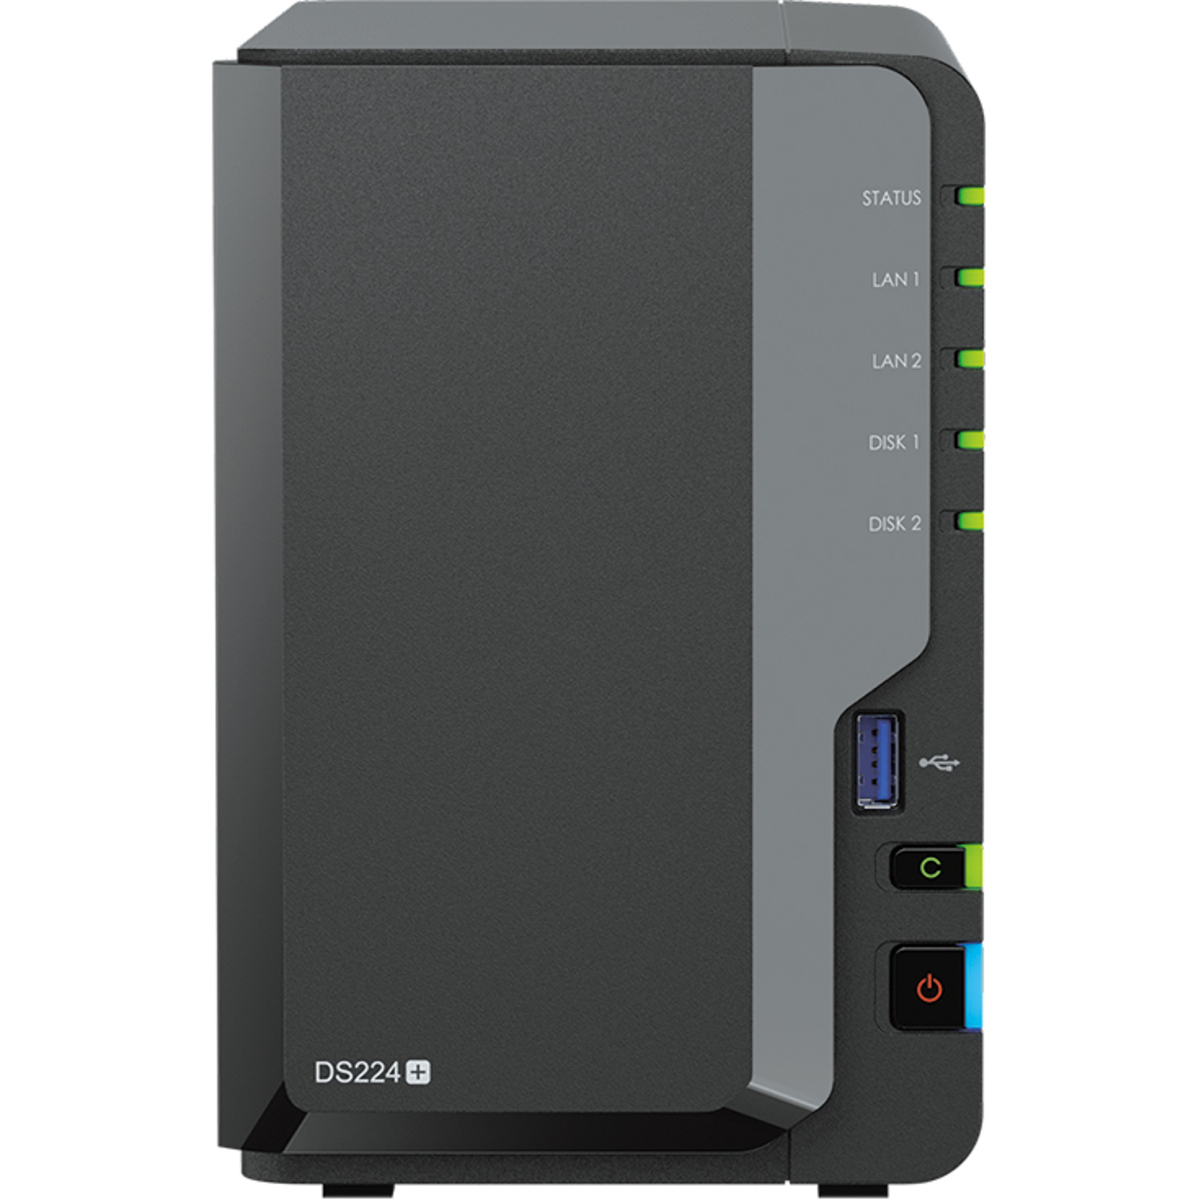 Synology DiskStation DS224+ 48tb 2-Bay Desktop Personal / Basic Home / Small Office NAS - Network Attached Storage Device 2x24tb Seagate IronWolf Pro ST24000NT002 3.5 7200rpm SATA 6Gb/s HDD NAS Class Drives Installed - Burn-In Tested - ON SALE - FREE RAM UPGRADE DiskStation DS224+